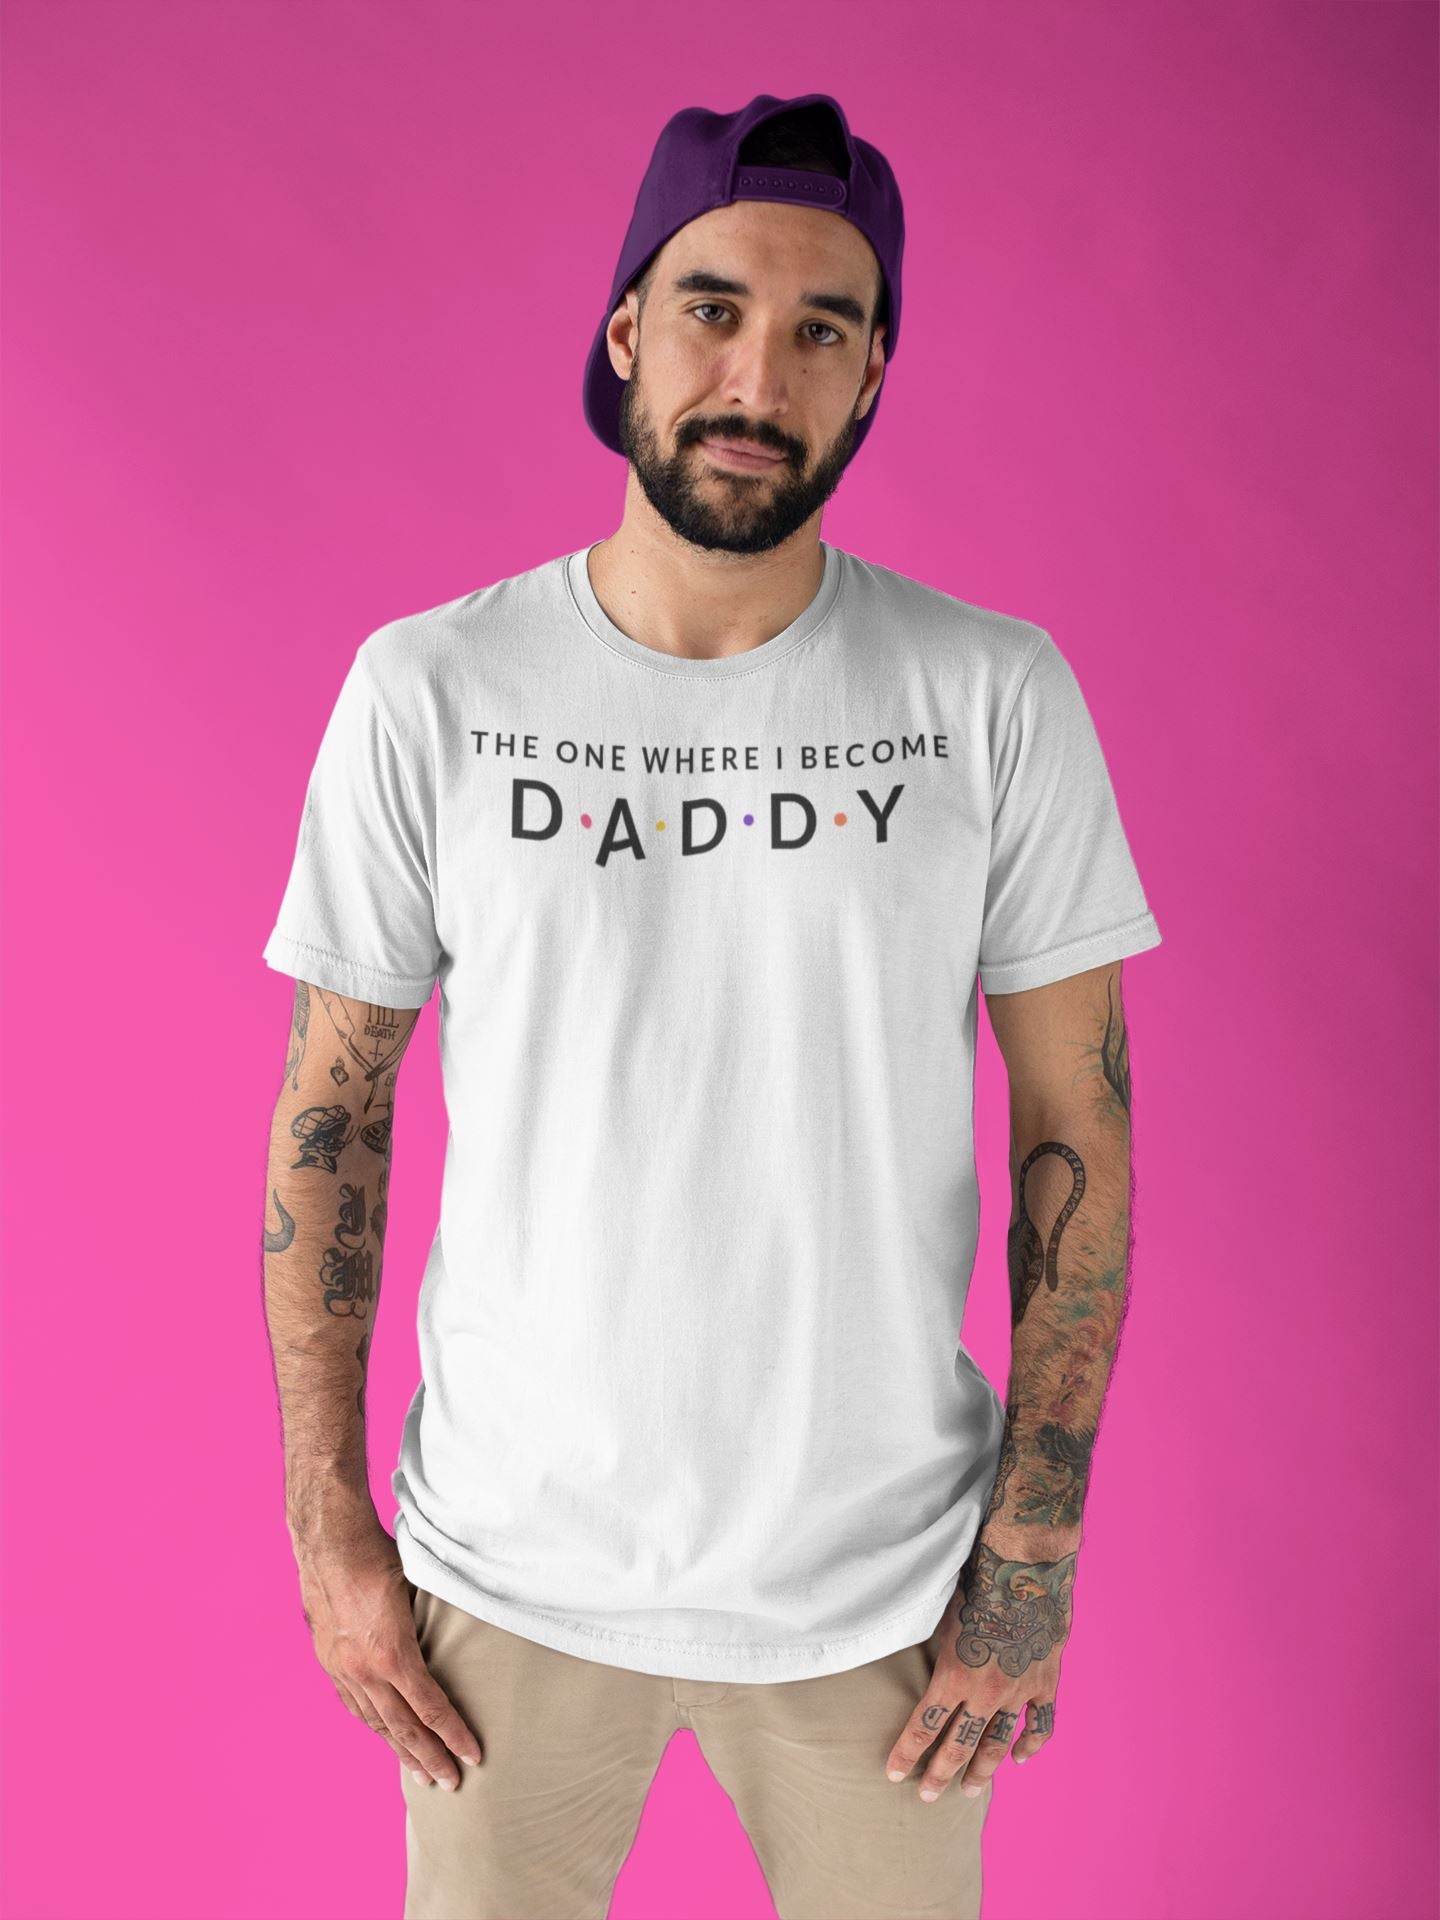 The One Where I Become Daddy Supreme White T Shirt for Men - White / L